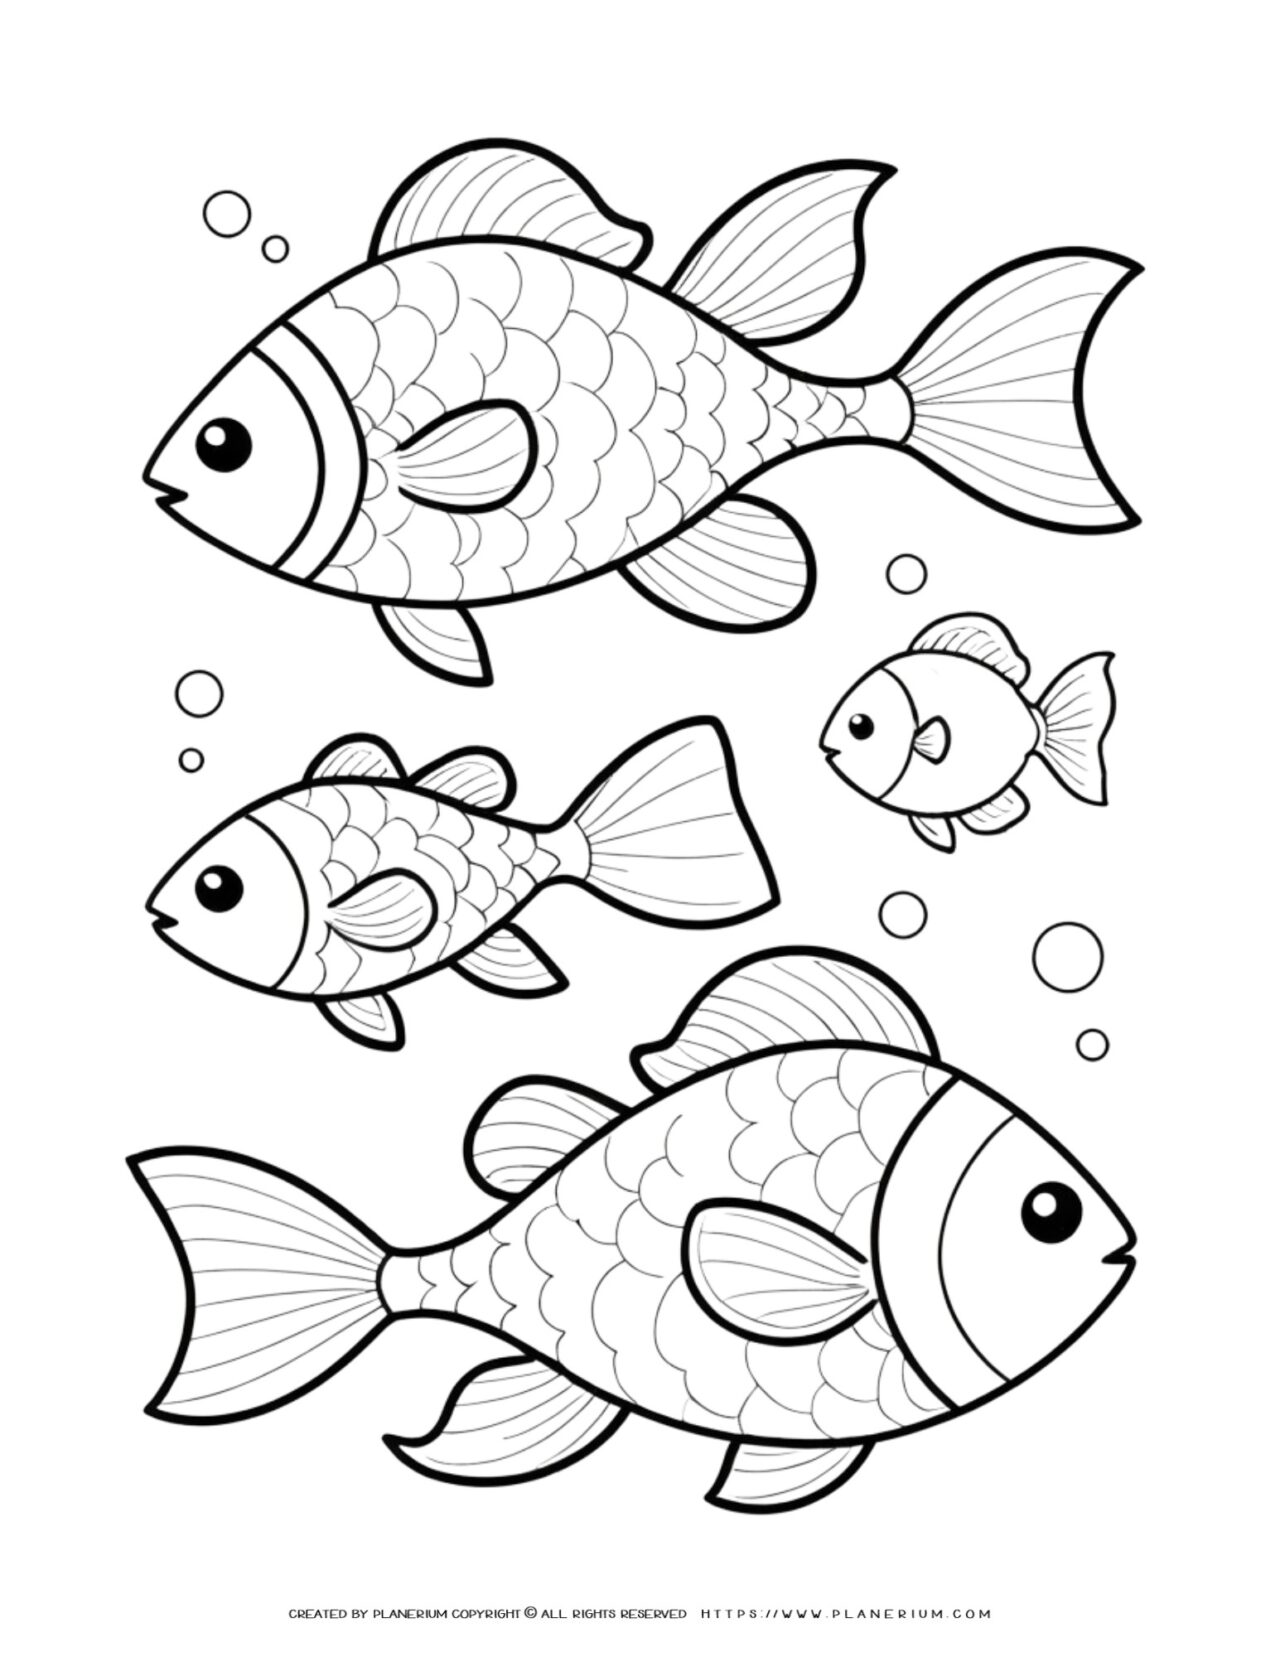 Fish-coloring-page-with-bubbles